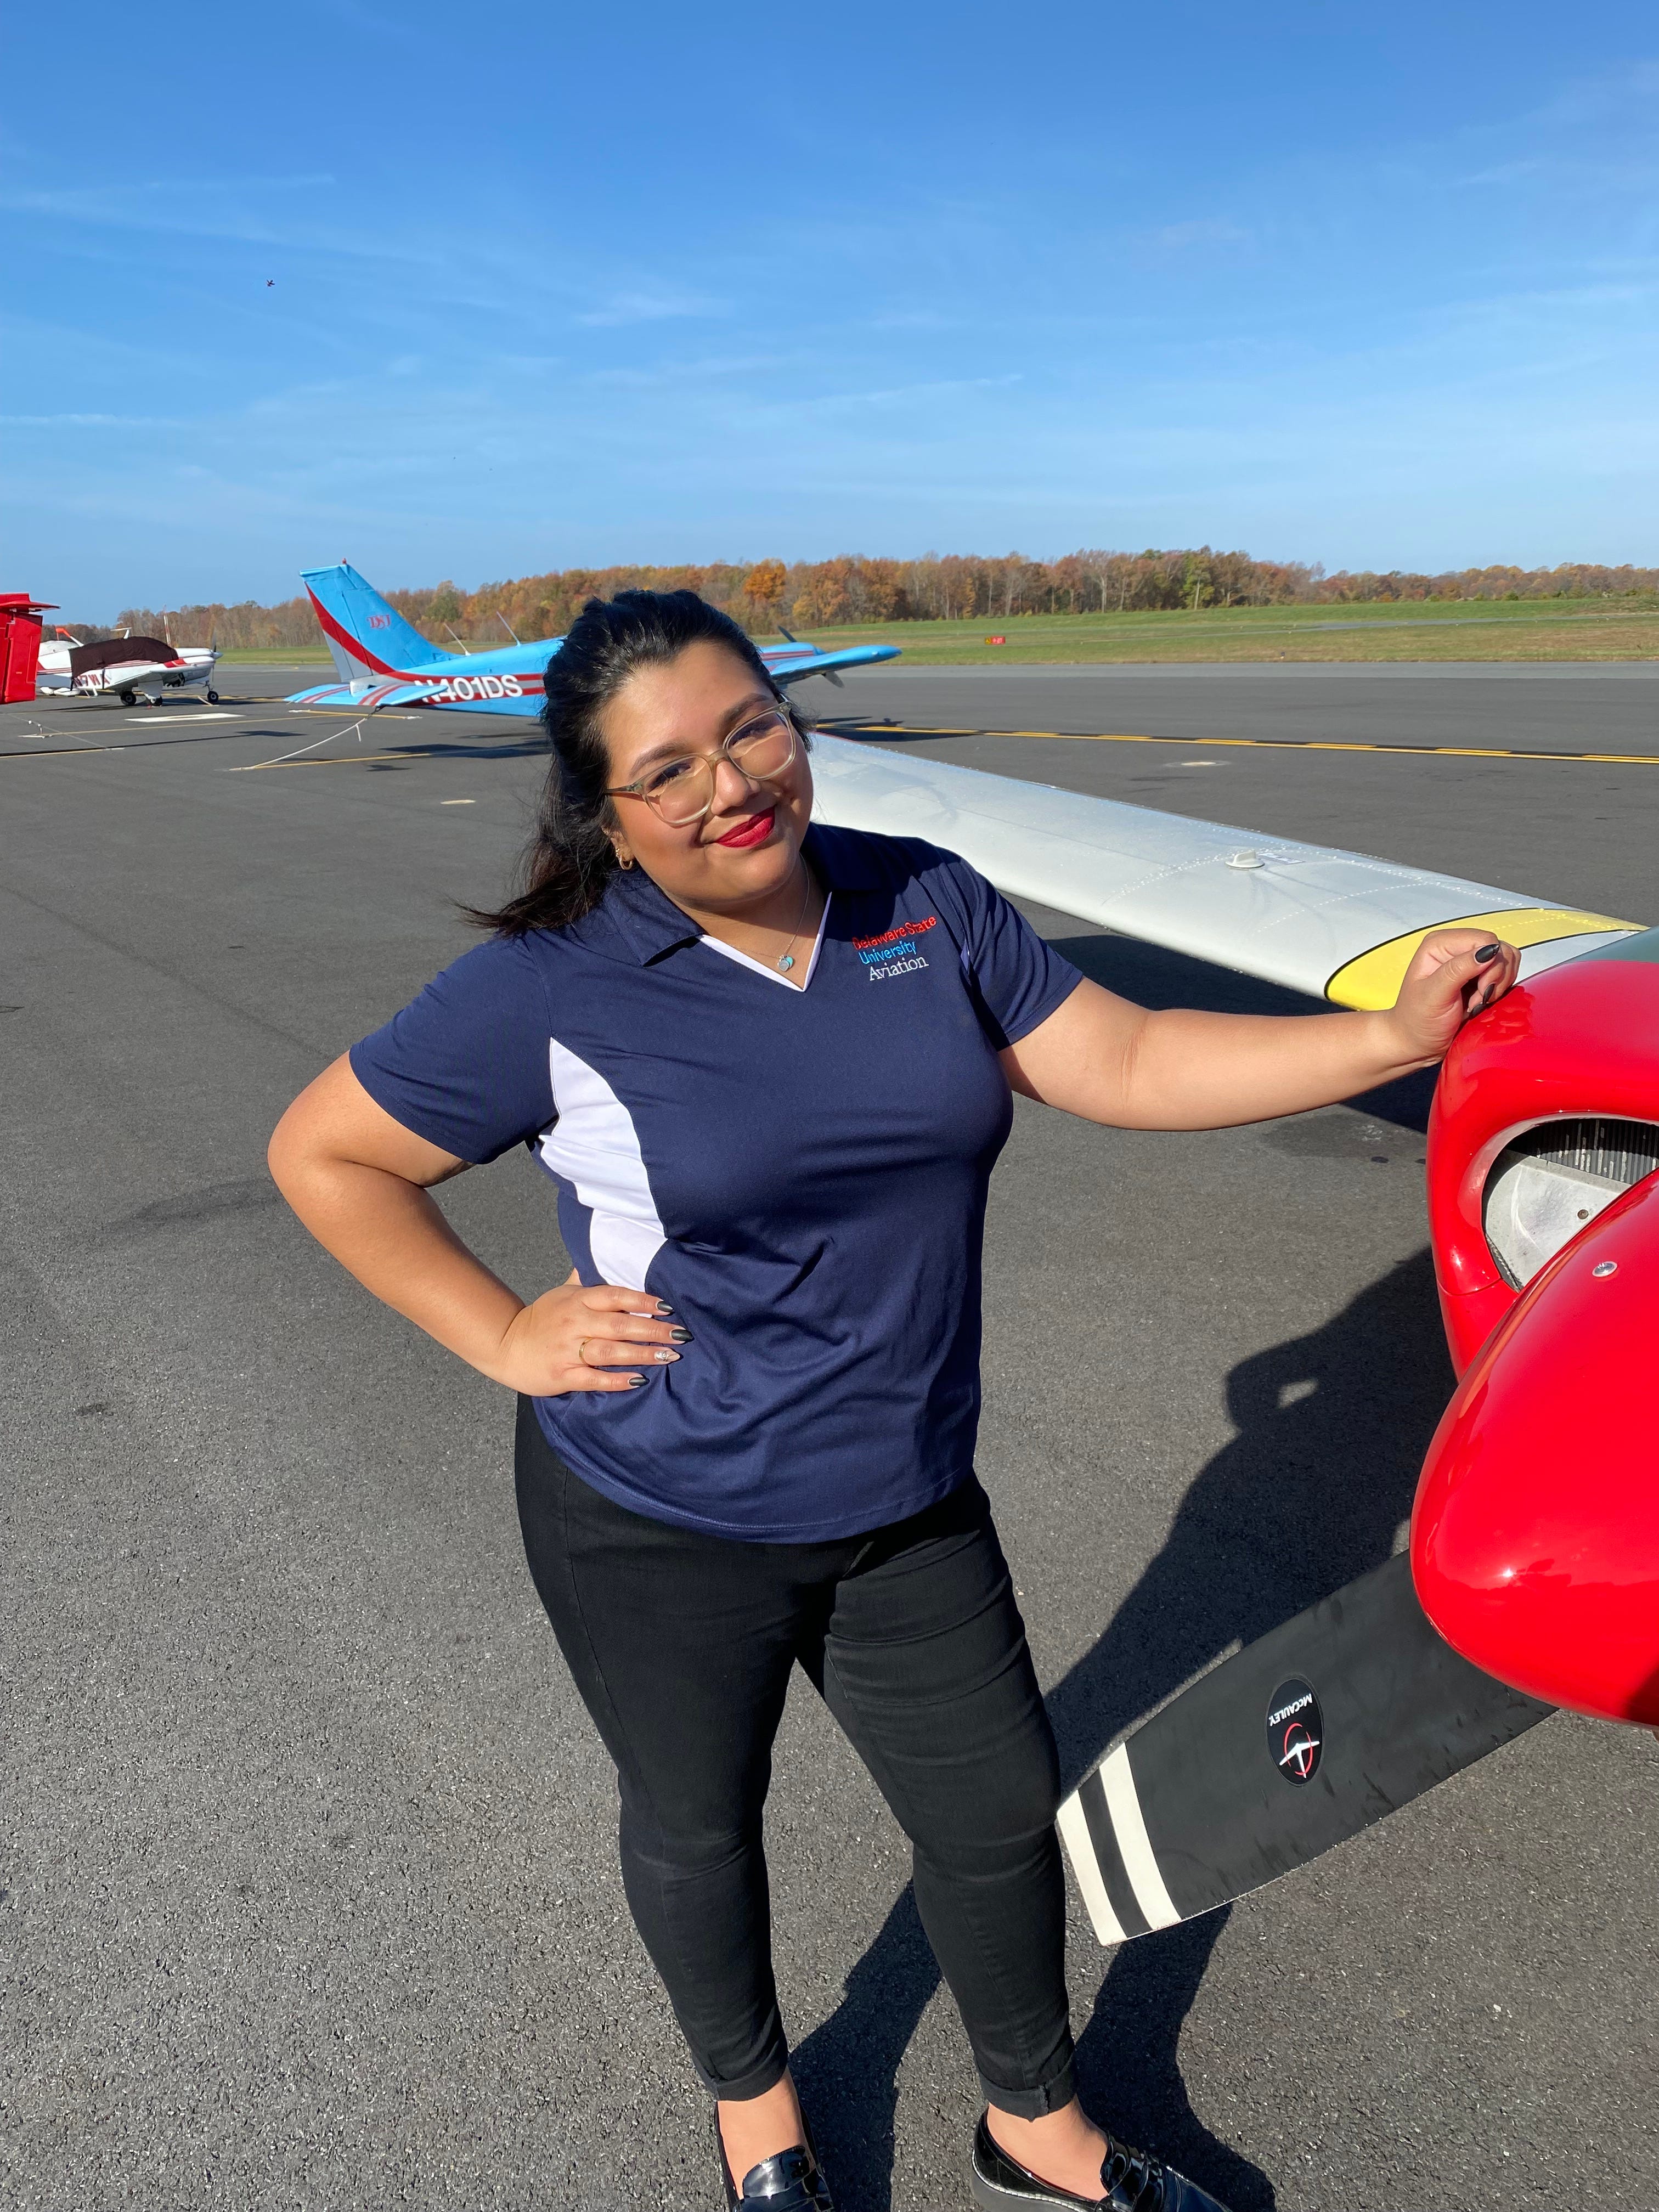 When pandemic shutdowns rippled across the country, they jeopardized Eliana Rothwell's chances of graduating with her aviation degree.